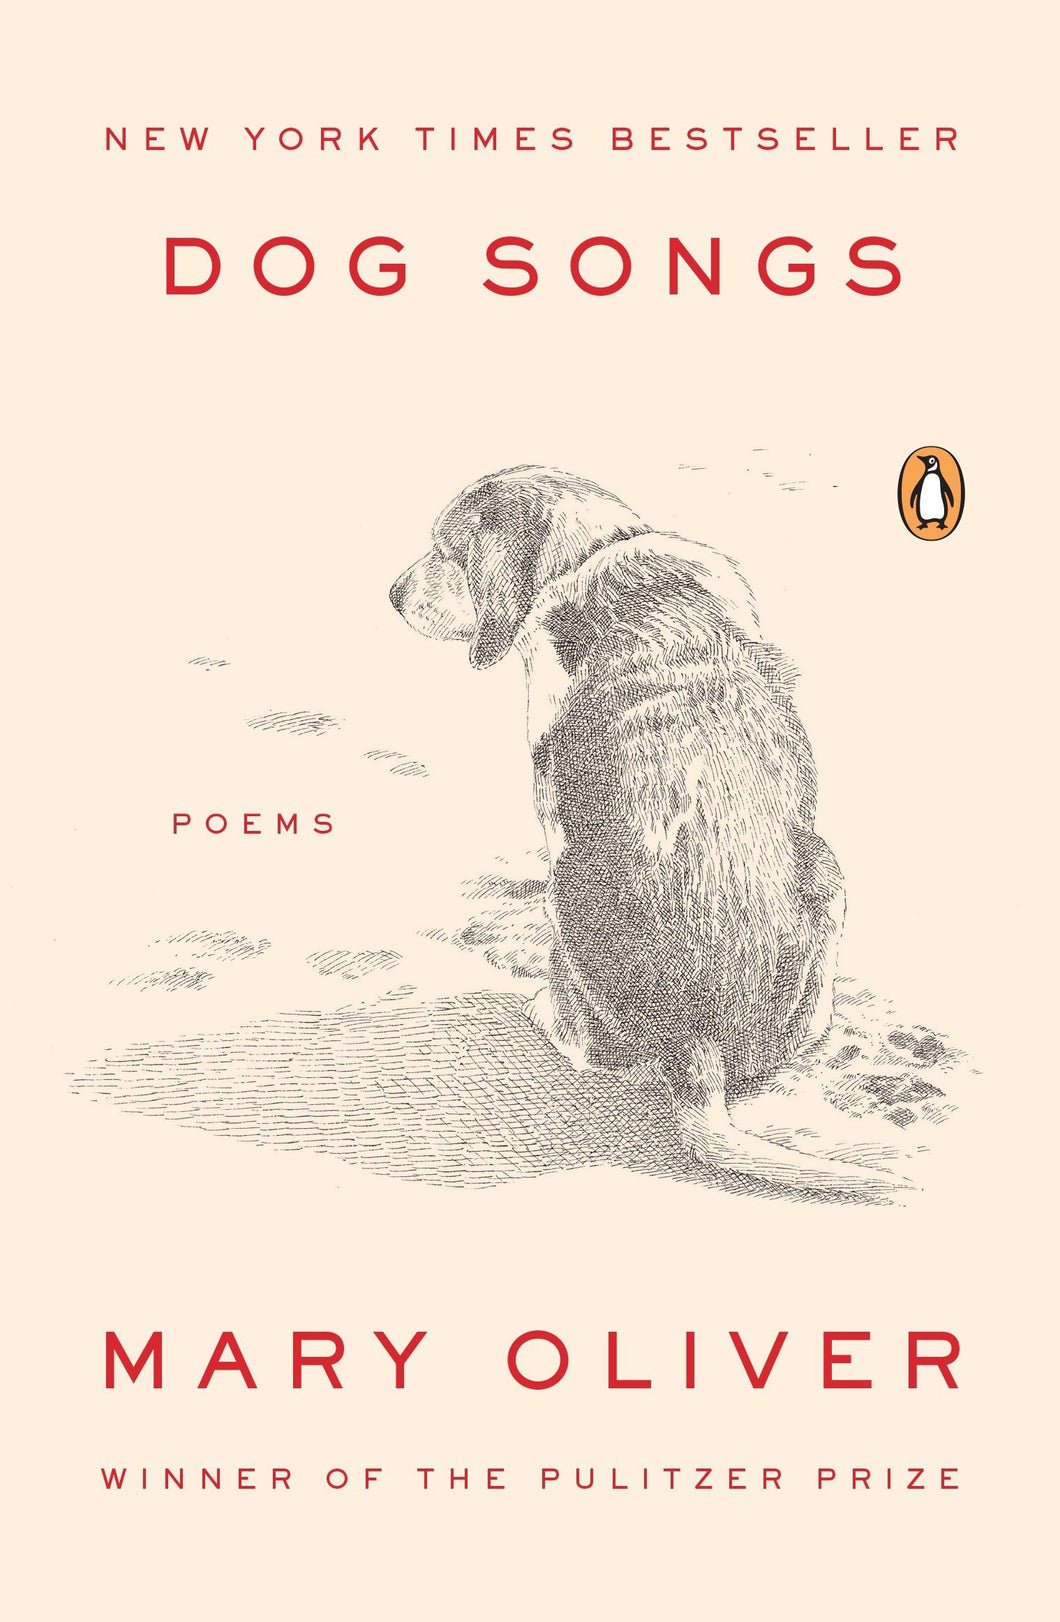 Dog Songs: Poems by Mary Oliver / Hardcover or Paperback - NEW BOOK OR BOOK BOX